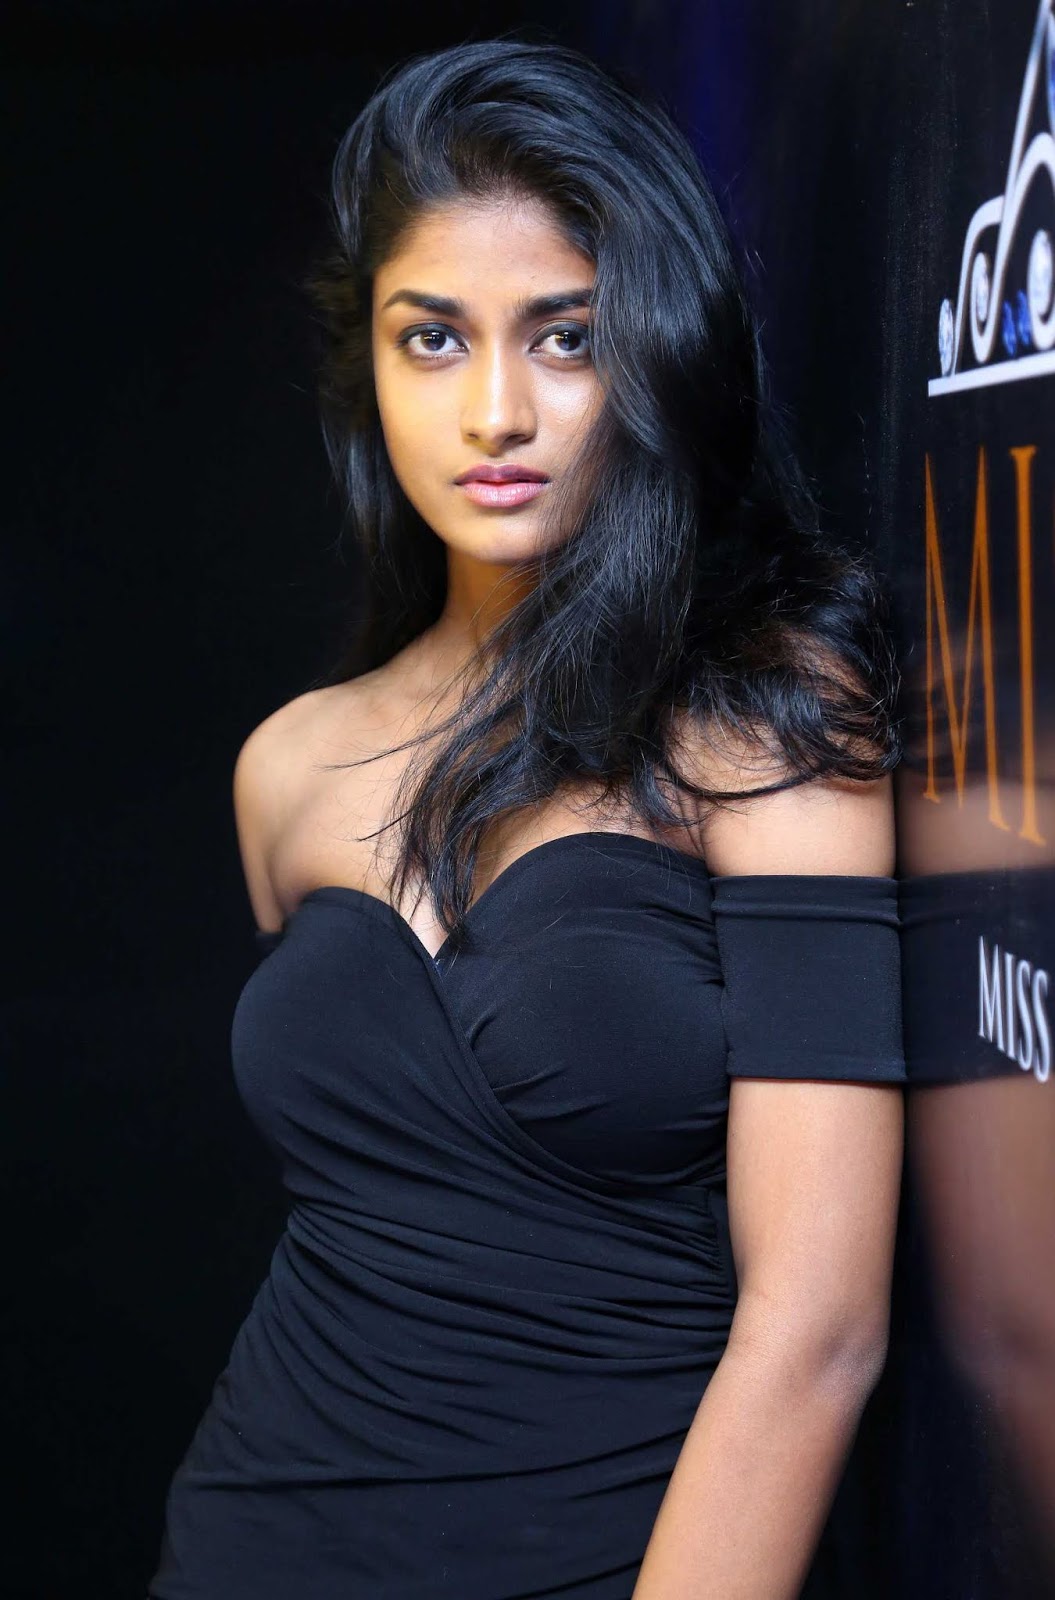 Actress Dimple Hayathi looking ultra-stylish in these new images or photo s...